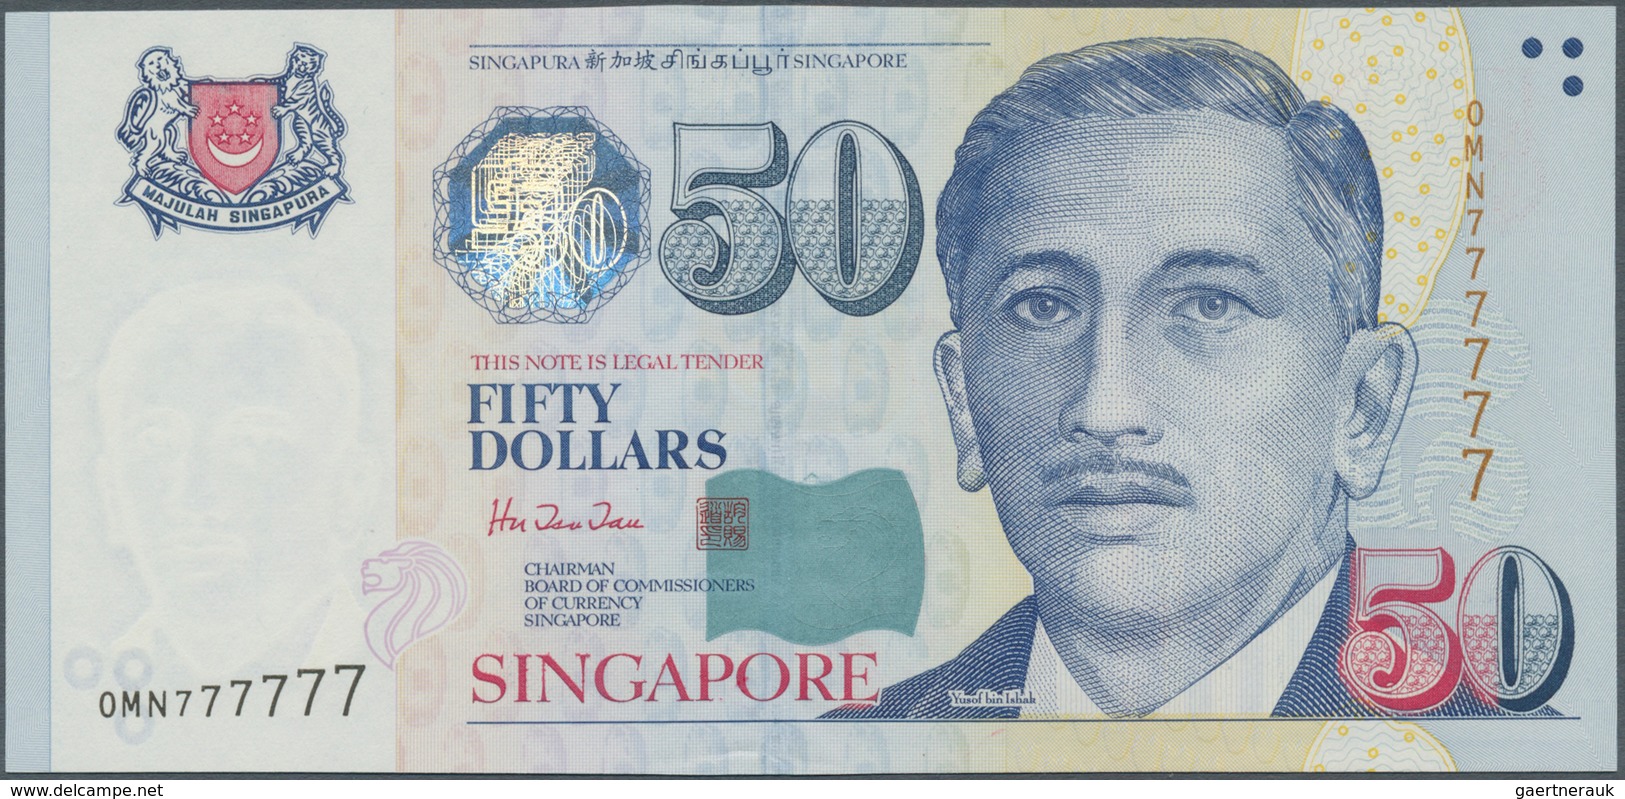 Singapore / Singapur: 50 Dollars ND(1999) P. 41a With Solid Number Serial #0MN 777777 In Condition: - Singapore